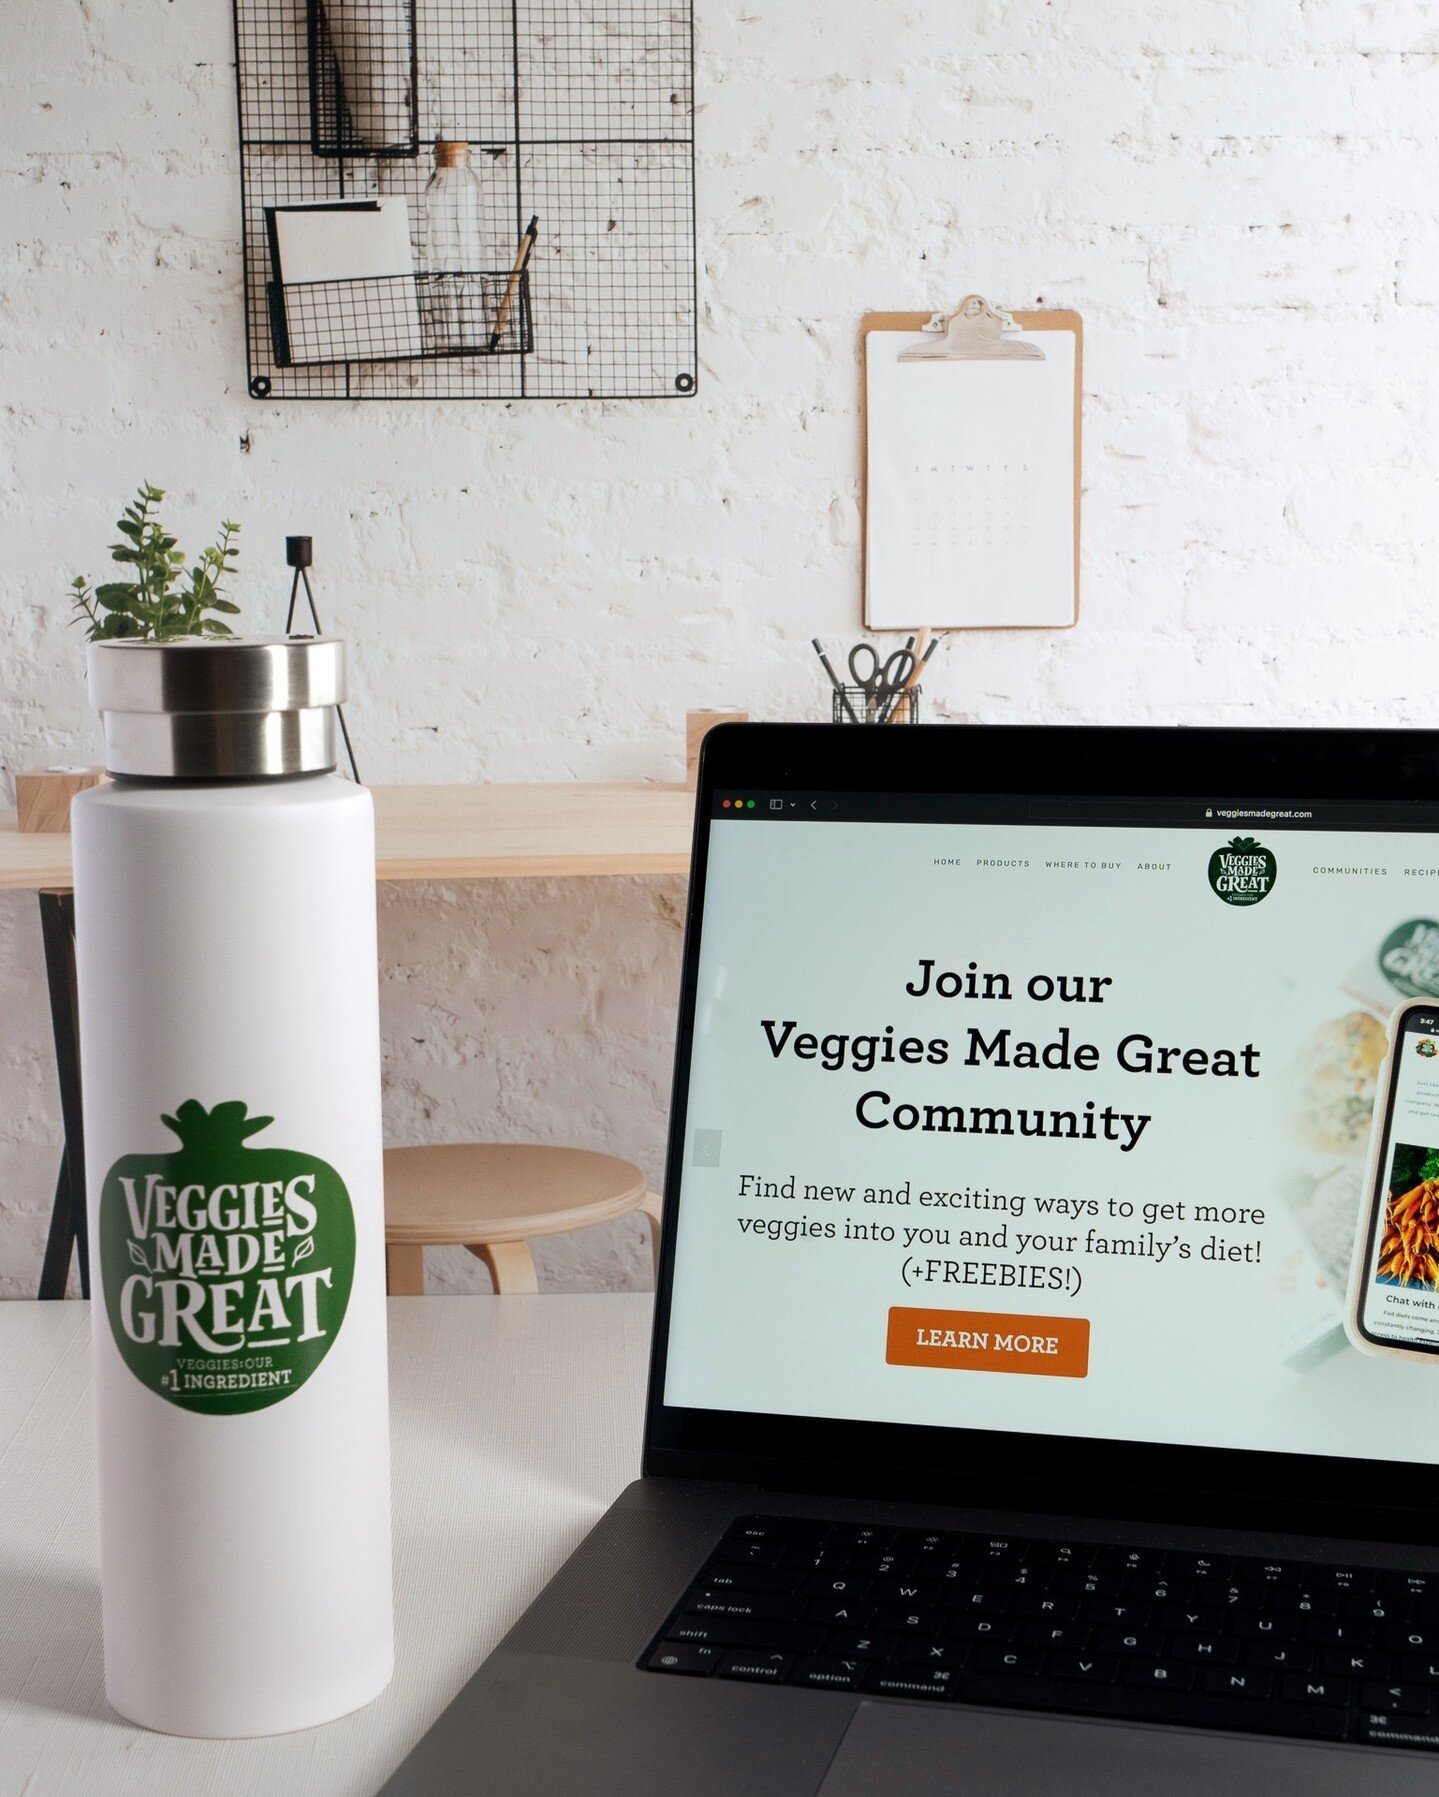 Calling all fans of @veggiesmadegreat! Do you want:

a) to learn from health experts
b) free swag and discounts on VMG products
c) all of the above

If you answered C, then join our #VegHead community at the link in bio!